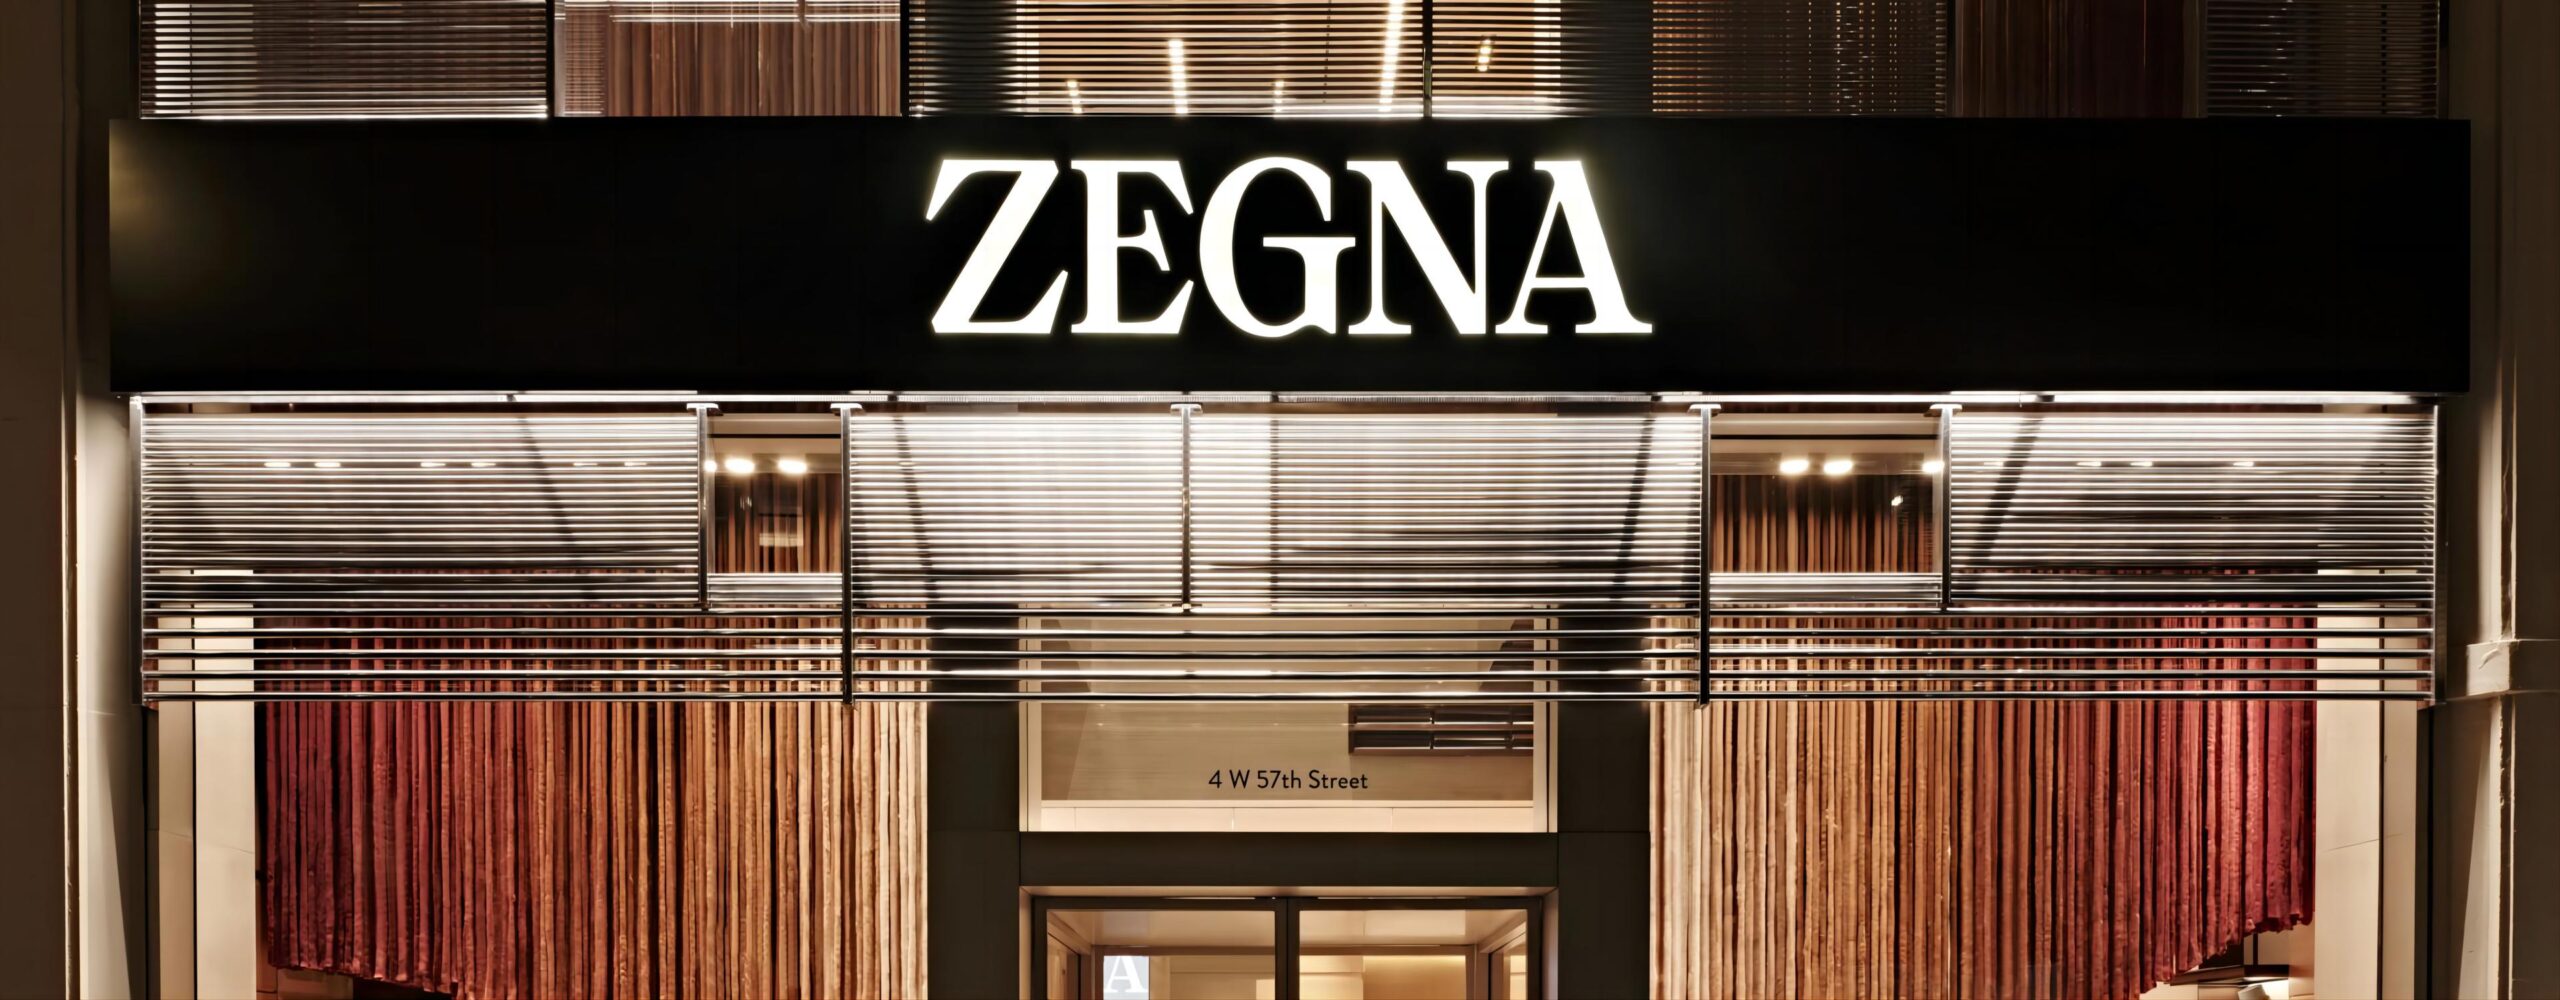 Zegna Management Discusses Enhancing Performance and Desirability in China